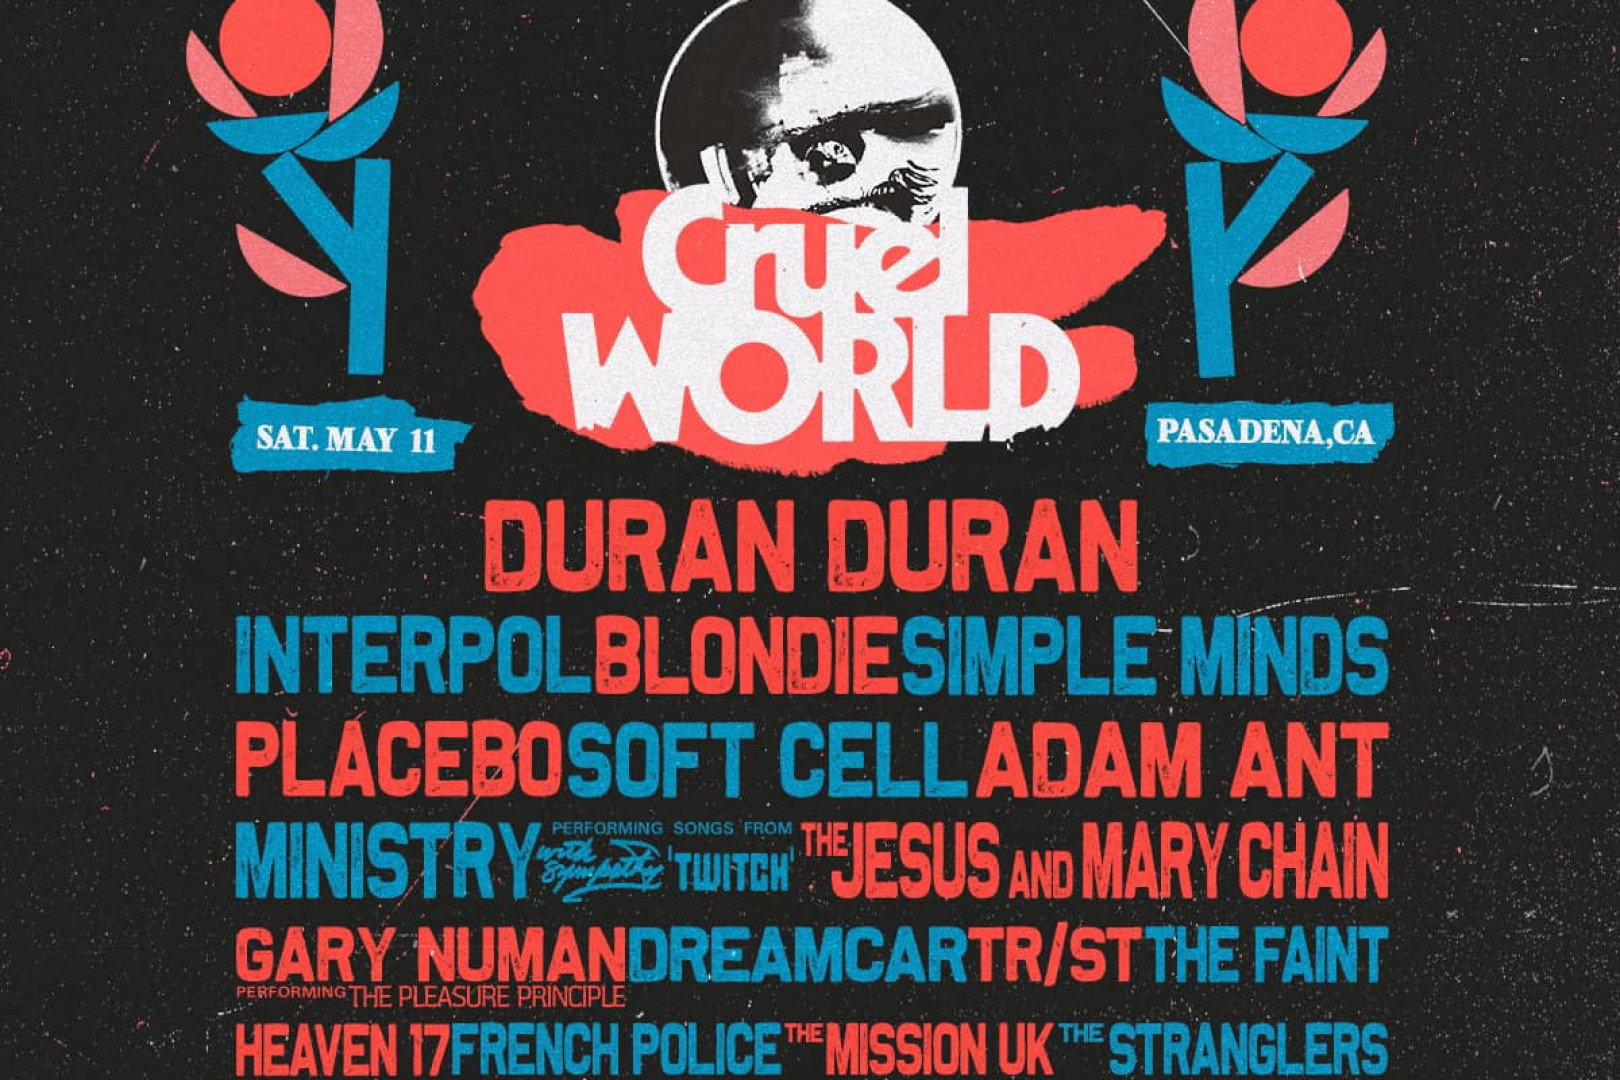 Ministry to play 'With Sympathy,' Gary Numan to play 'Pleasure Principle' at Cruel World